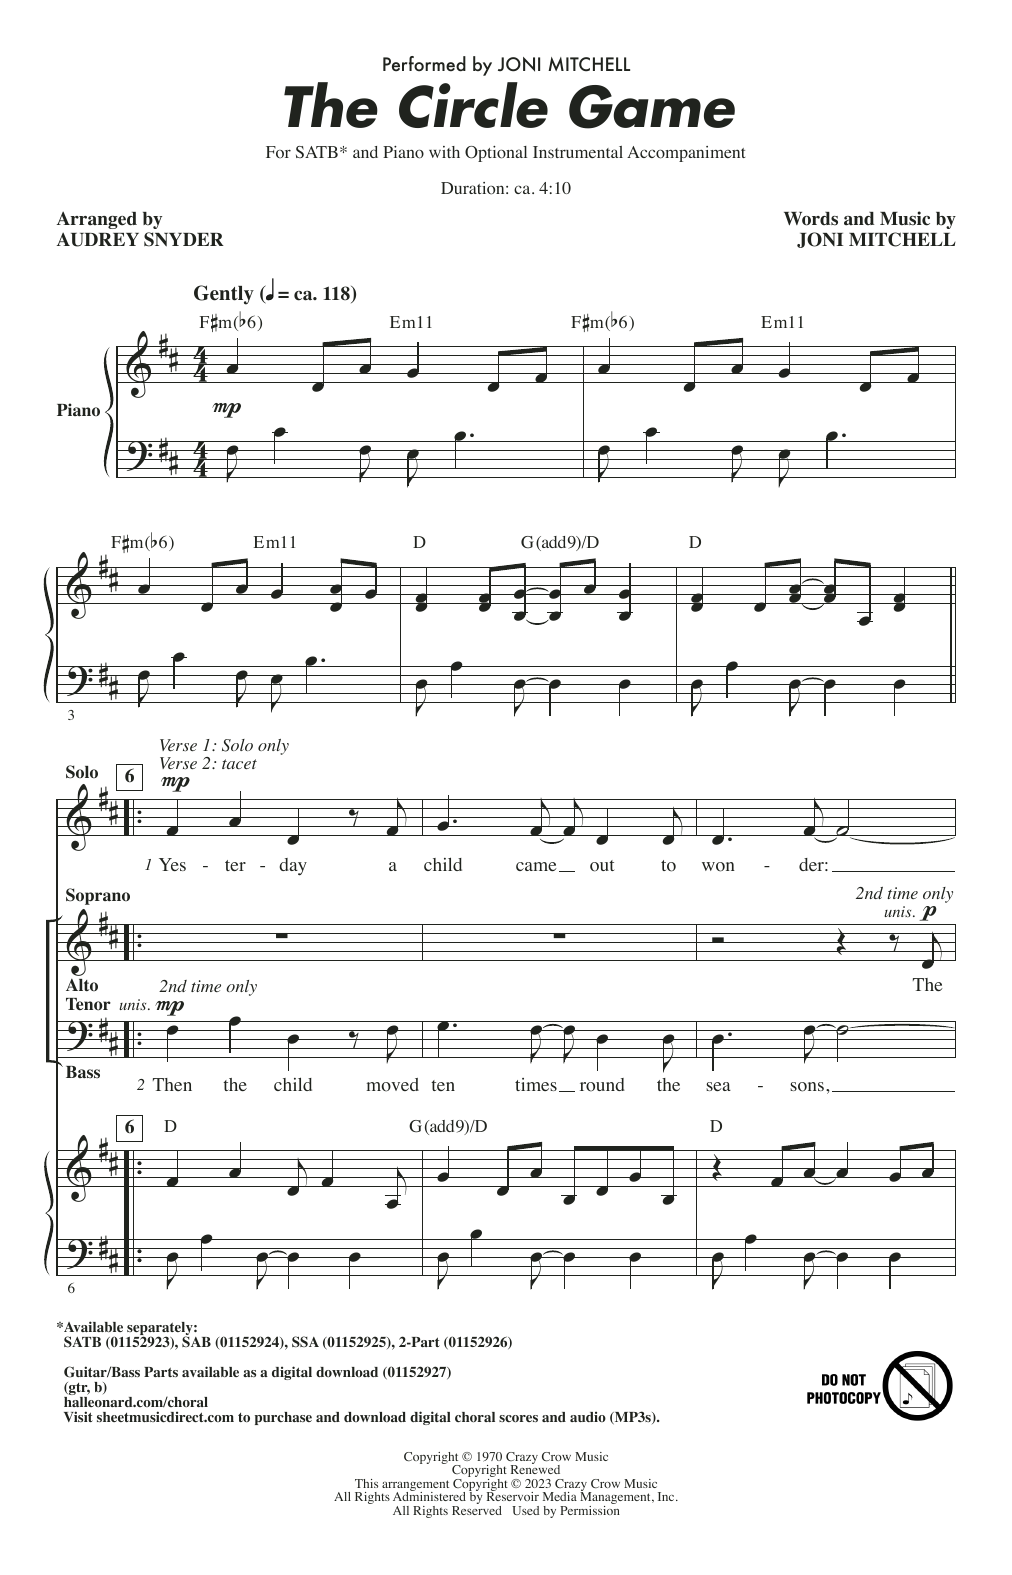 Joni Mitchell The Circle Game (arr. Audrey Snyder) sheet music notes printable PDF score